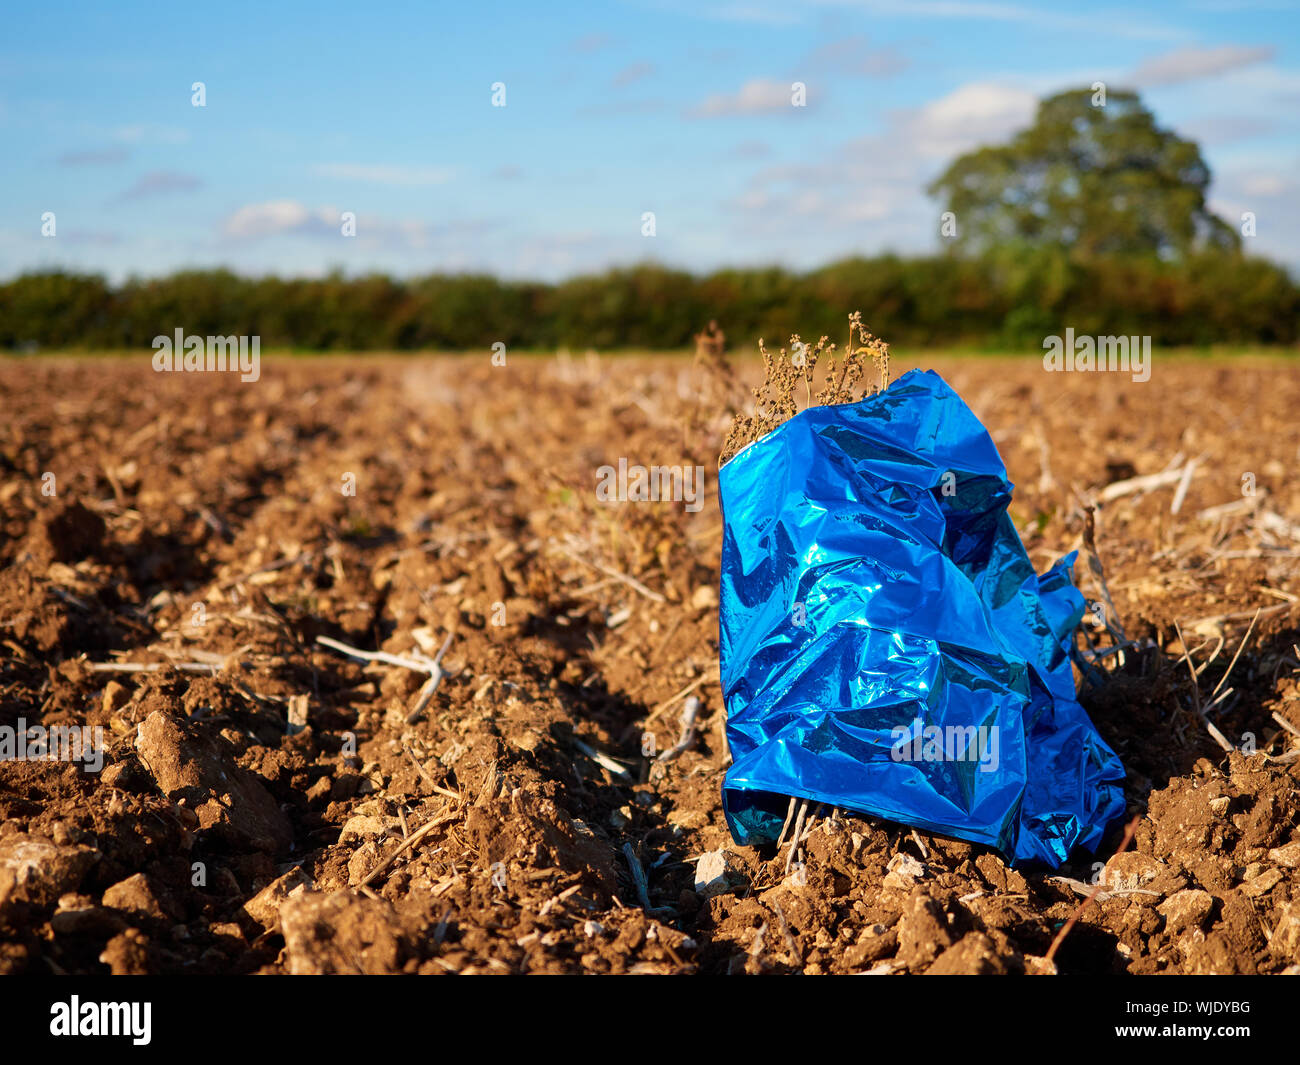 A discarded foil helium balloon littering an agricultural field causing an unsightly hazard for livestock and wildlife, plastic waste pollution Stock Photo